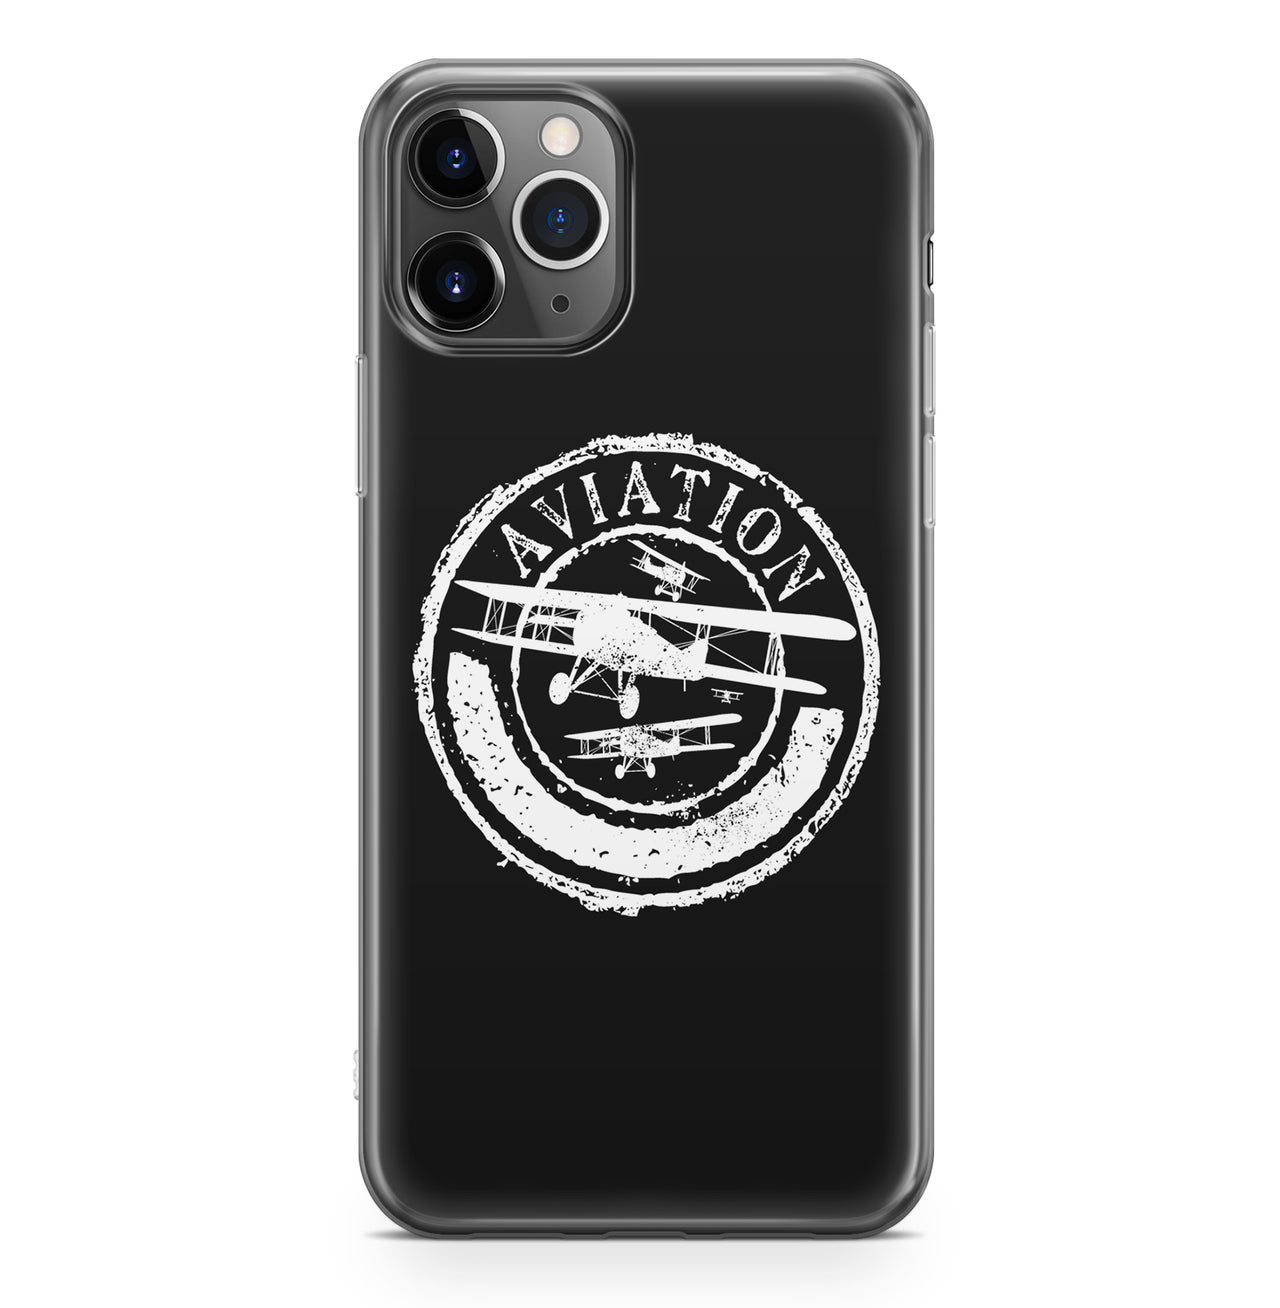 Aviation Lovers Designed iPhone Cases